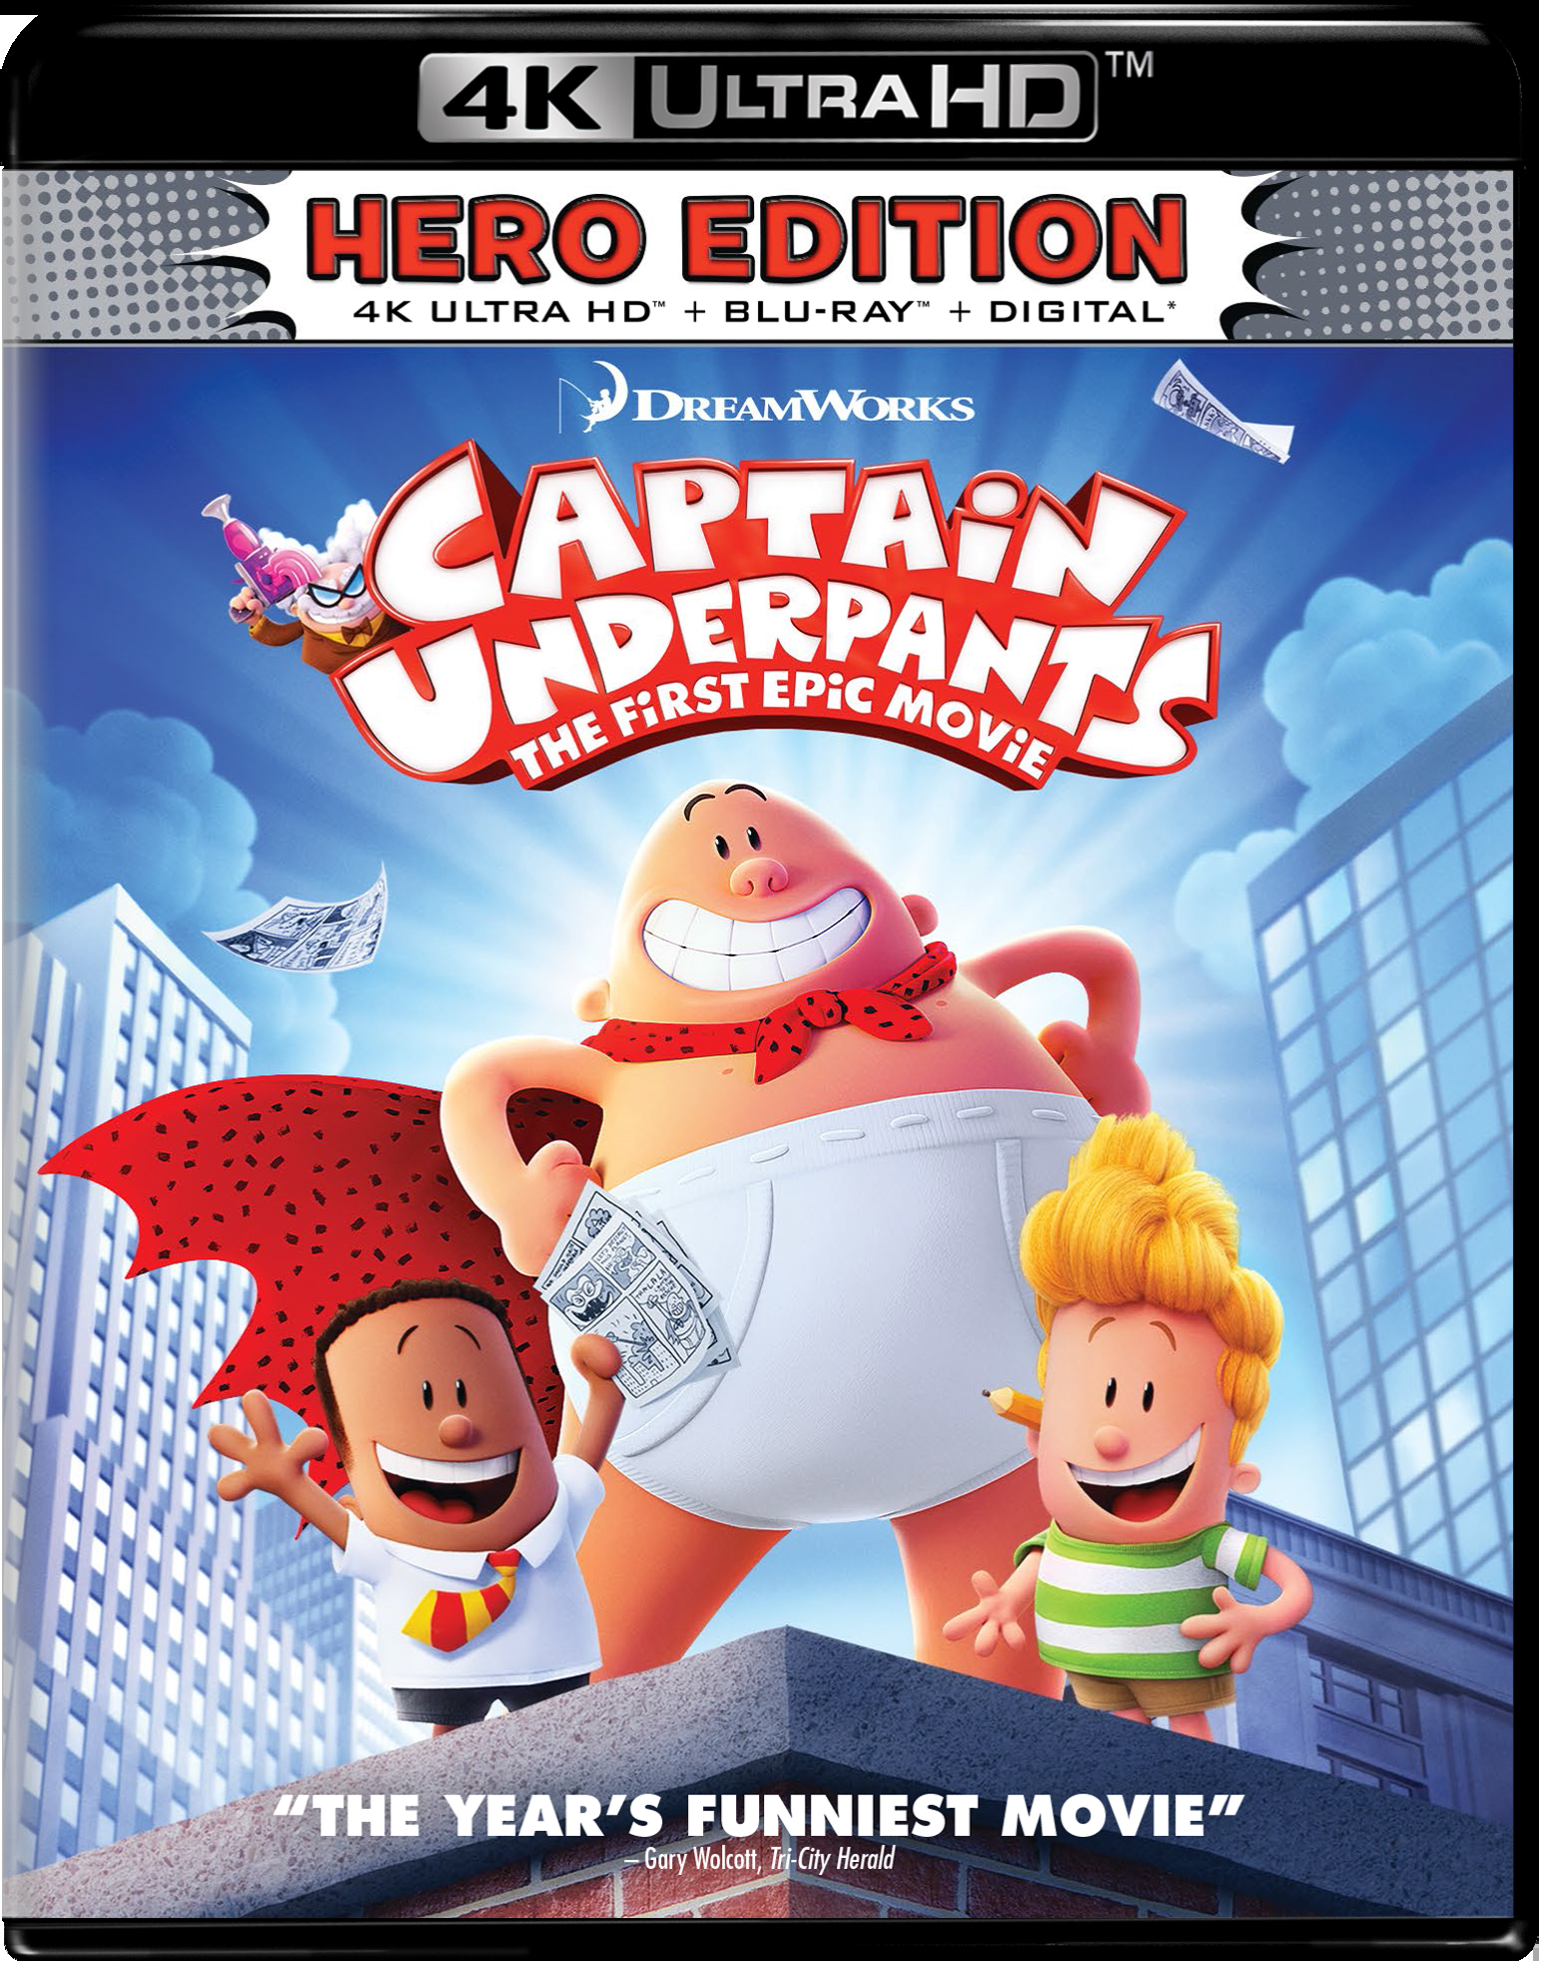 Captain Underpants: The First Epic Movie 2017 (4K ULTRA HD + BLURAY)